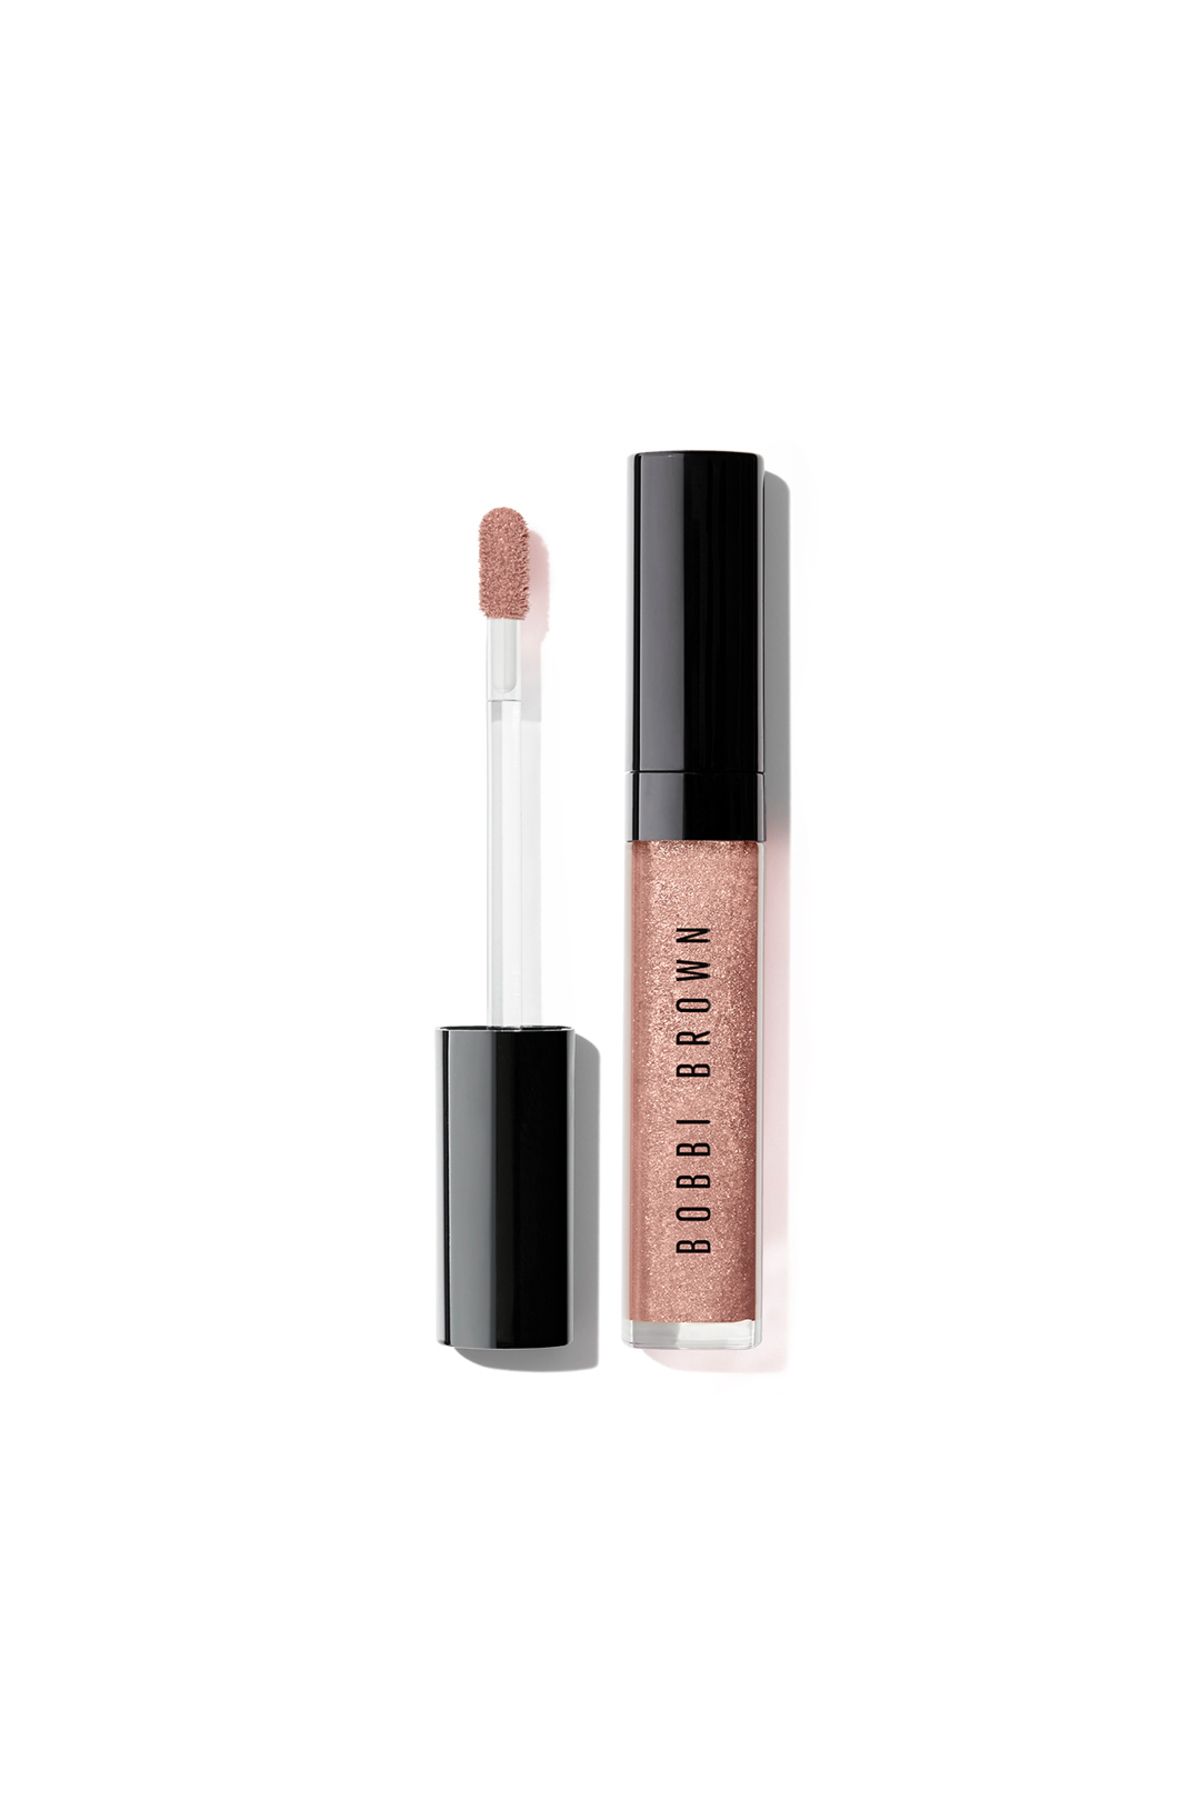 Bobbi Brown CRUSHED OİL-İNFUSED GLOSS SHİMMER / PLUMP LİPS SPARKLİNG LİP GLOSS - BARE SPARKLE 6ML PSSN1556